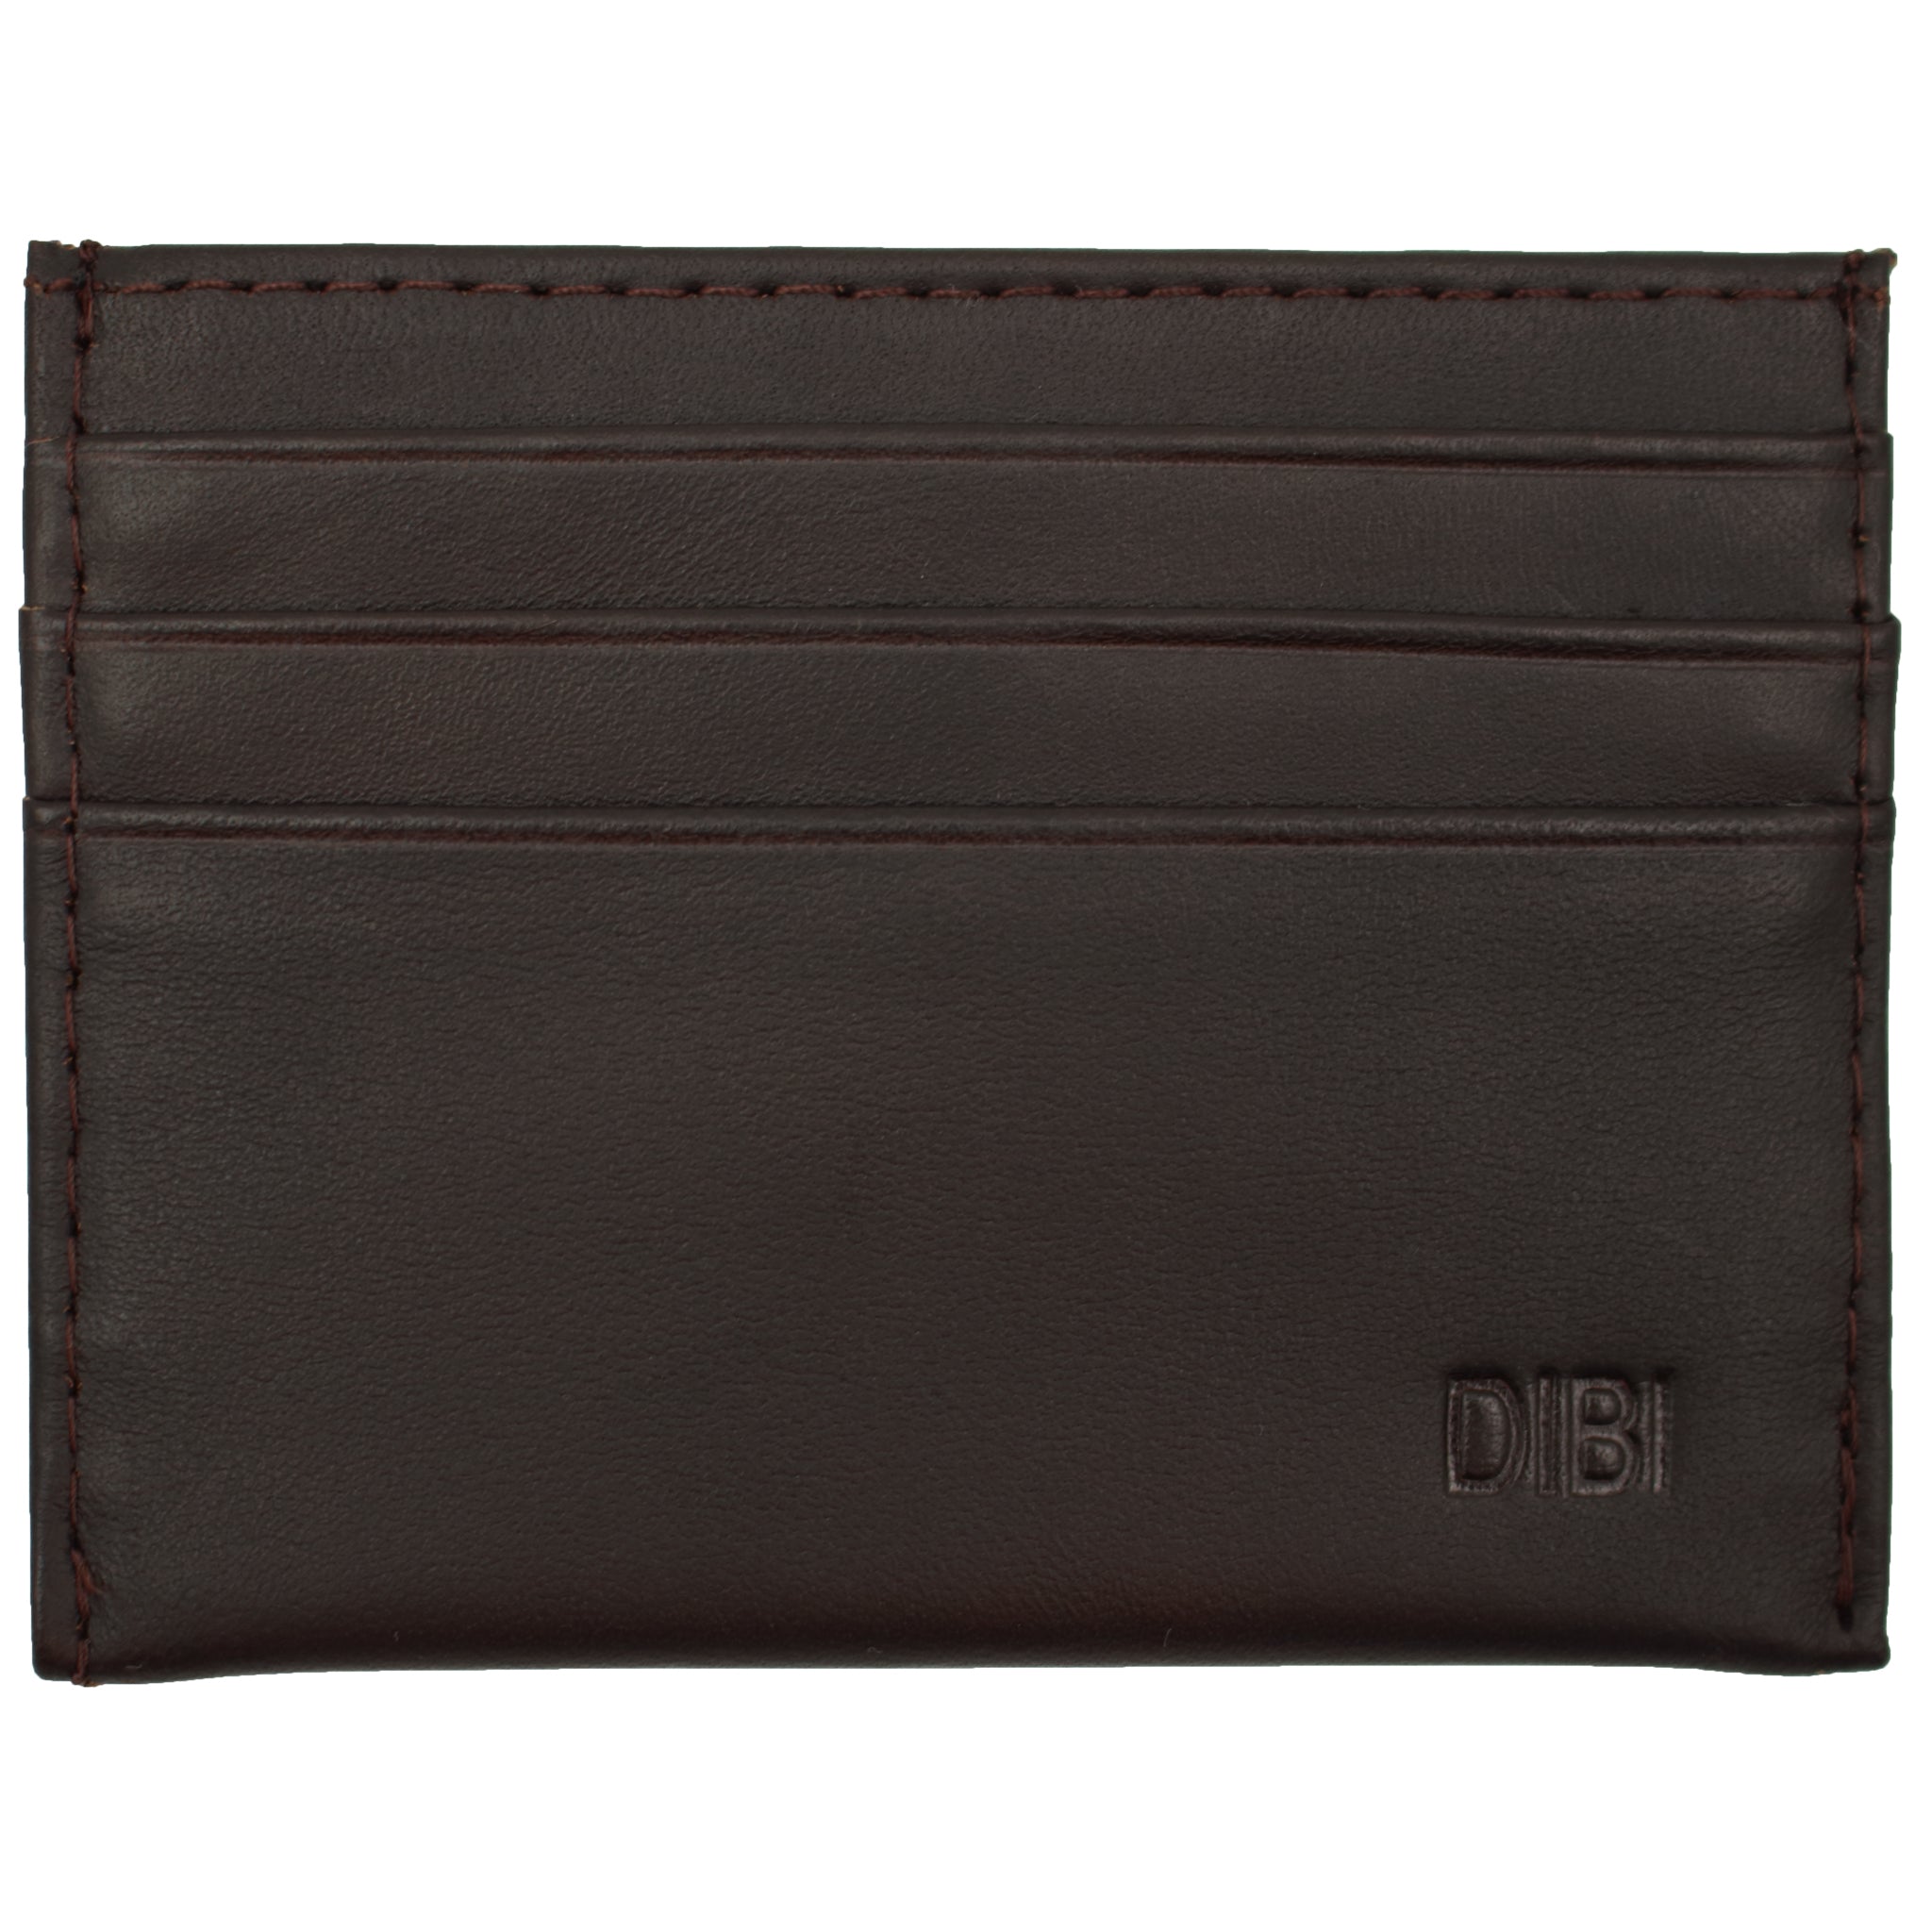 Cocoa Slim Leather Wallet